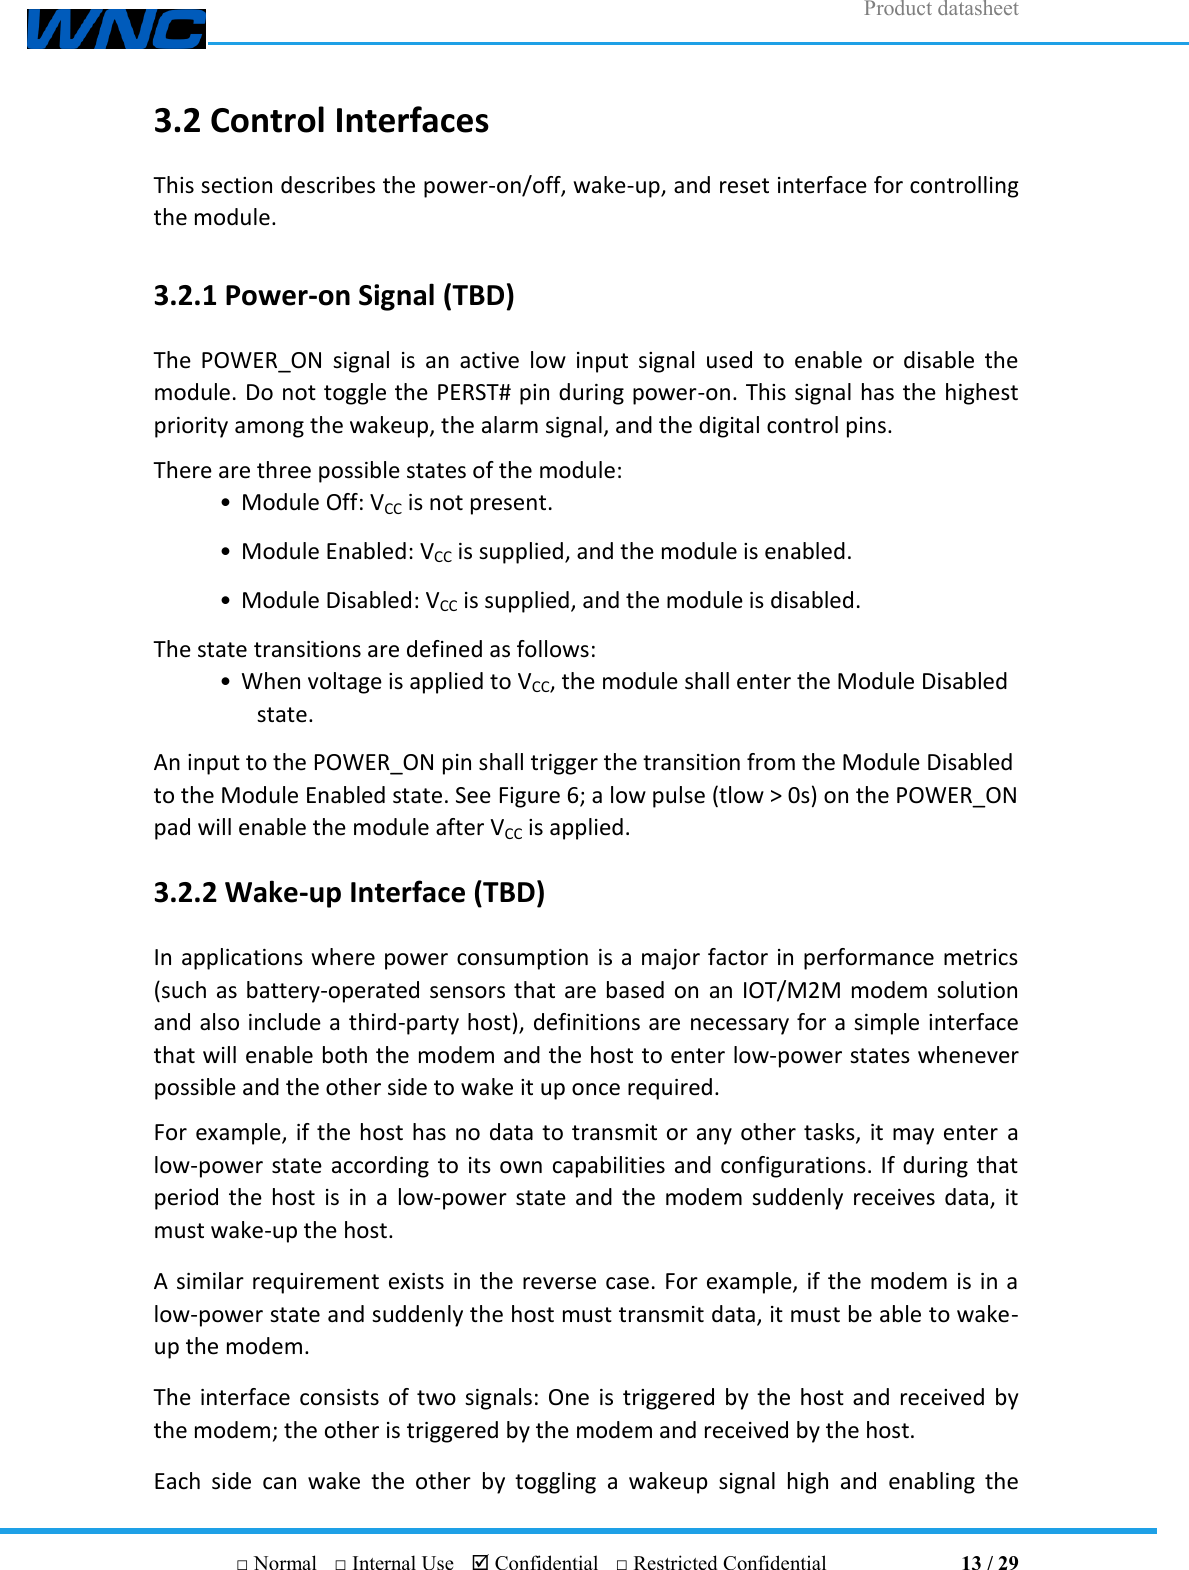 Product datasheet       □ Normal  □ Internal Use   Confidential  □ Restricted Confidential                                13 / 29 3.2 Control Interfaces This section describes the power-on/off, wake-up, and reset interface for controlling the module. 3.2.1 Power-on Signal (TBD) The  POWER_ON  signal  is  an  active  low  input  signal used  to  enable  or  disable  the module. Do not toggle the PERST# pin during power-on. This signal has the highest priority among the wakeup, the alarm signal, and the digital control pins. There are three possible states of the module: • Module Off: VCC is not present. • Module Enabled: VCC is supplied, and the module is enabled. • Module Disabled: VCC is supplied, and the module is disabled. The state transitions are defined as follows: • When voltage is applied to VCC, the module shall enter the Module Disabled state. An input to the POWER_ON pin shall trigger the transition from the Module Disabled to the Module Enabled state. See Figure 6; a low pulse (tlow &gt; 0s) on the POWER_ON pad will enable the module after VCC is applied. 3.2.2 Wake-up Interface (TBD) In applications where power consumption is a major factor in performance metrics (such as battery-operated sensors that are based on  an IOT/M2M modem solution and also include a third-party host), definitions are necessary for a simple interface that will enable both the modem and the host to enter low-power states whenever possible and the other side to wake it up once required. For example, if the host has no data to transmit or any other tasks, it may enter  a low-power state according to its own capabilities and configurations. If during that period the host  is  in a  low-power  state and the modem suddenly receives data, it must wake-up the host. A similar requirement exists in the reverse case. For example, if the modem is in a low-power state and suddenly the host must transmit data, it must be able to wake-up the modem. The interface consists of two signals: One is triggered by the host and received by the modem; the other is triggered by the modem and received by the host. Each  side  can  wake  the  other  by  toggling  a  wakeup  signal  high  and  enabling  the 